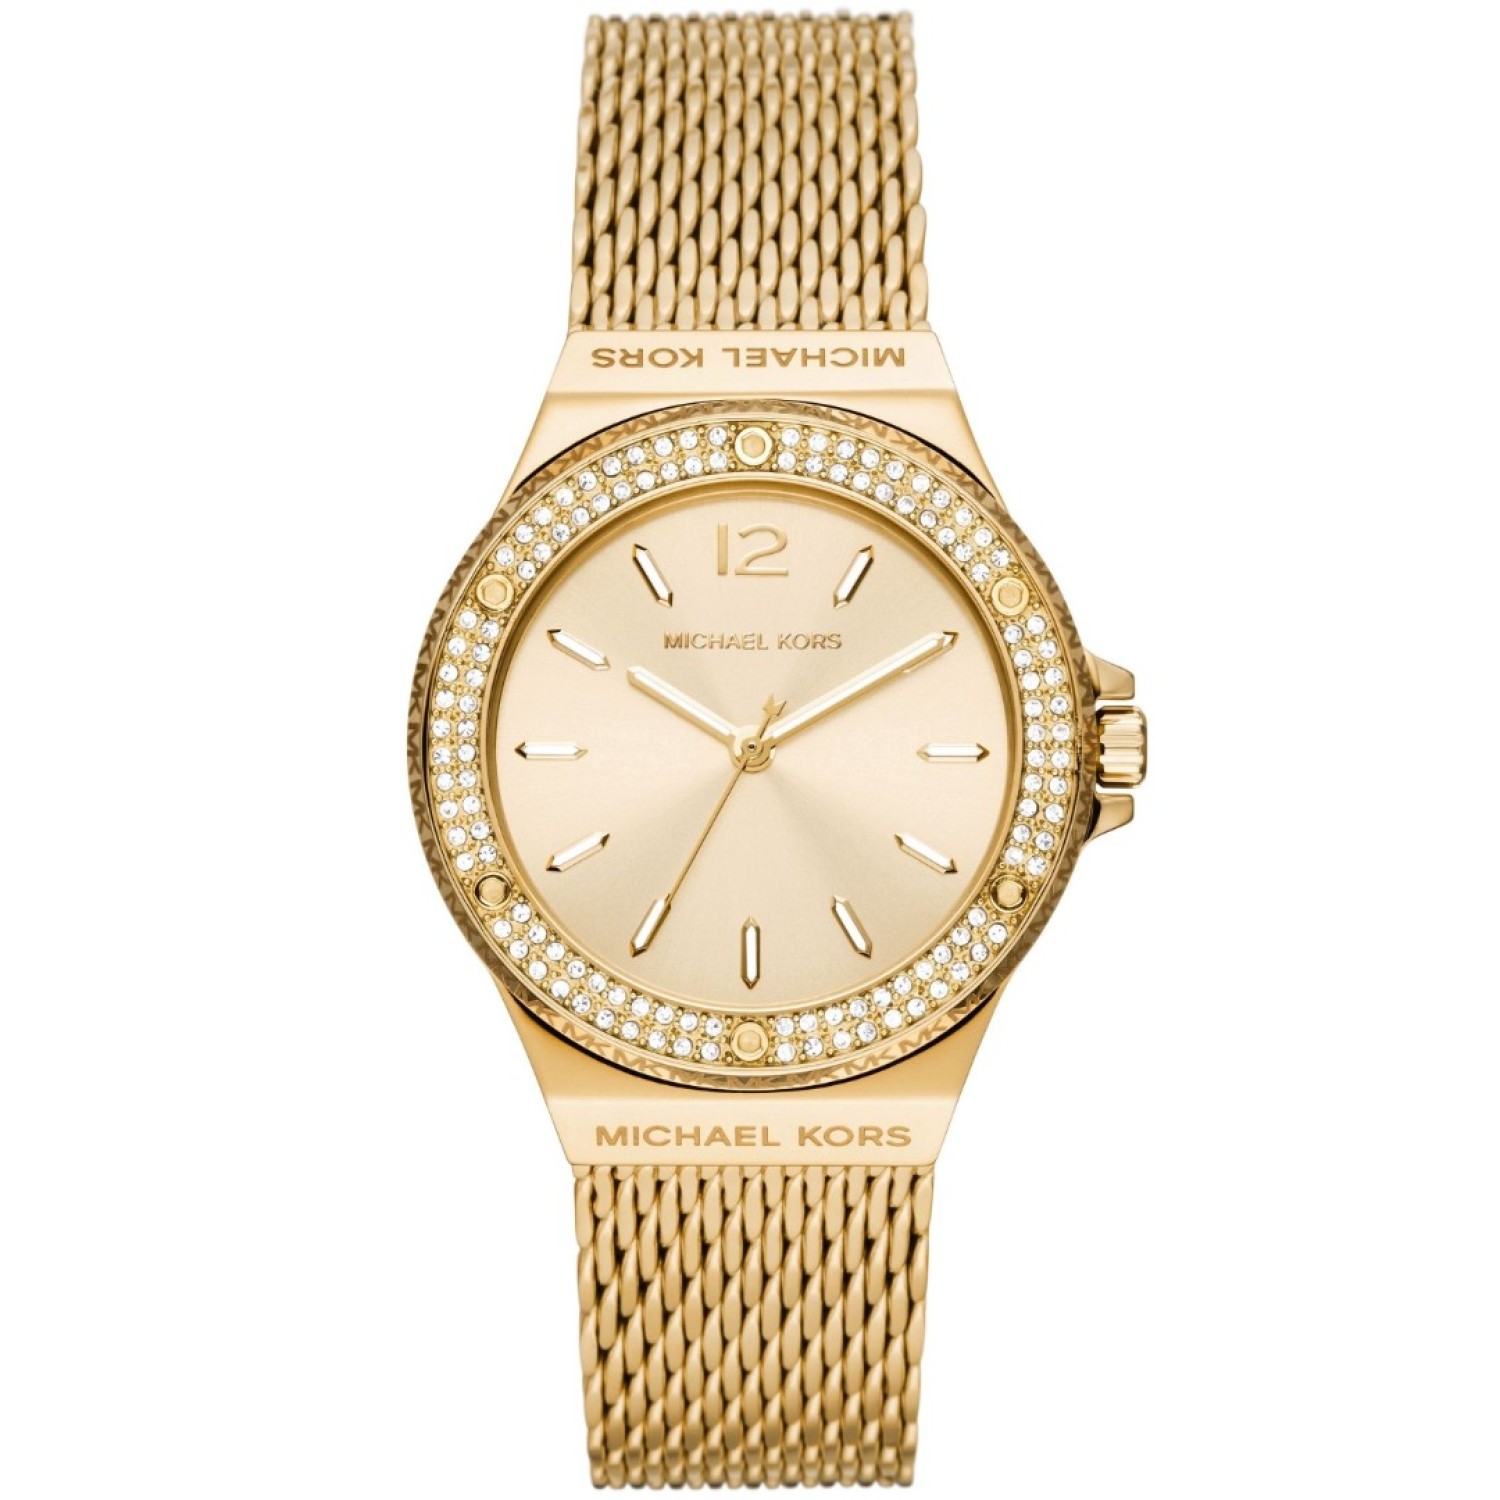 Mk4693 Michael Kors Parker Ladies  Gold-Tone Watch. unique engagement rings nz  MK4693 is a stunning women's watch that is designed to be both stylish and functional.